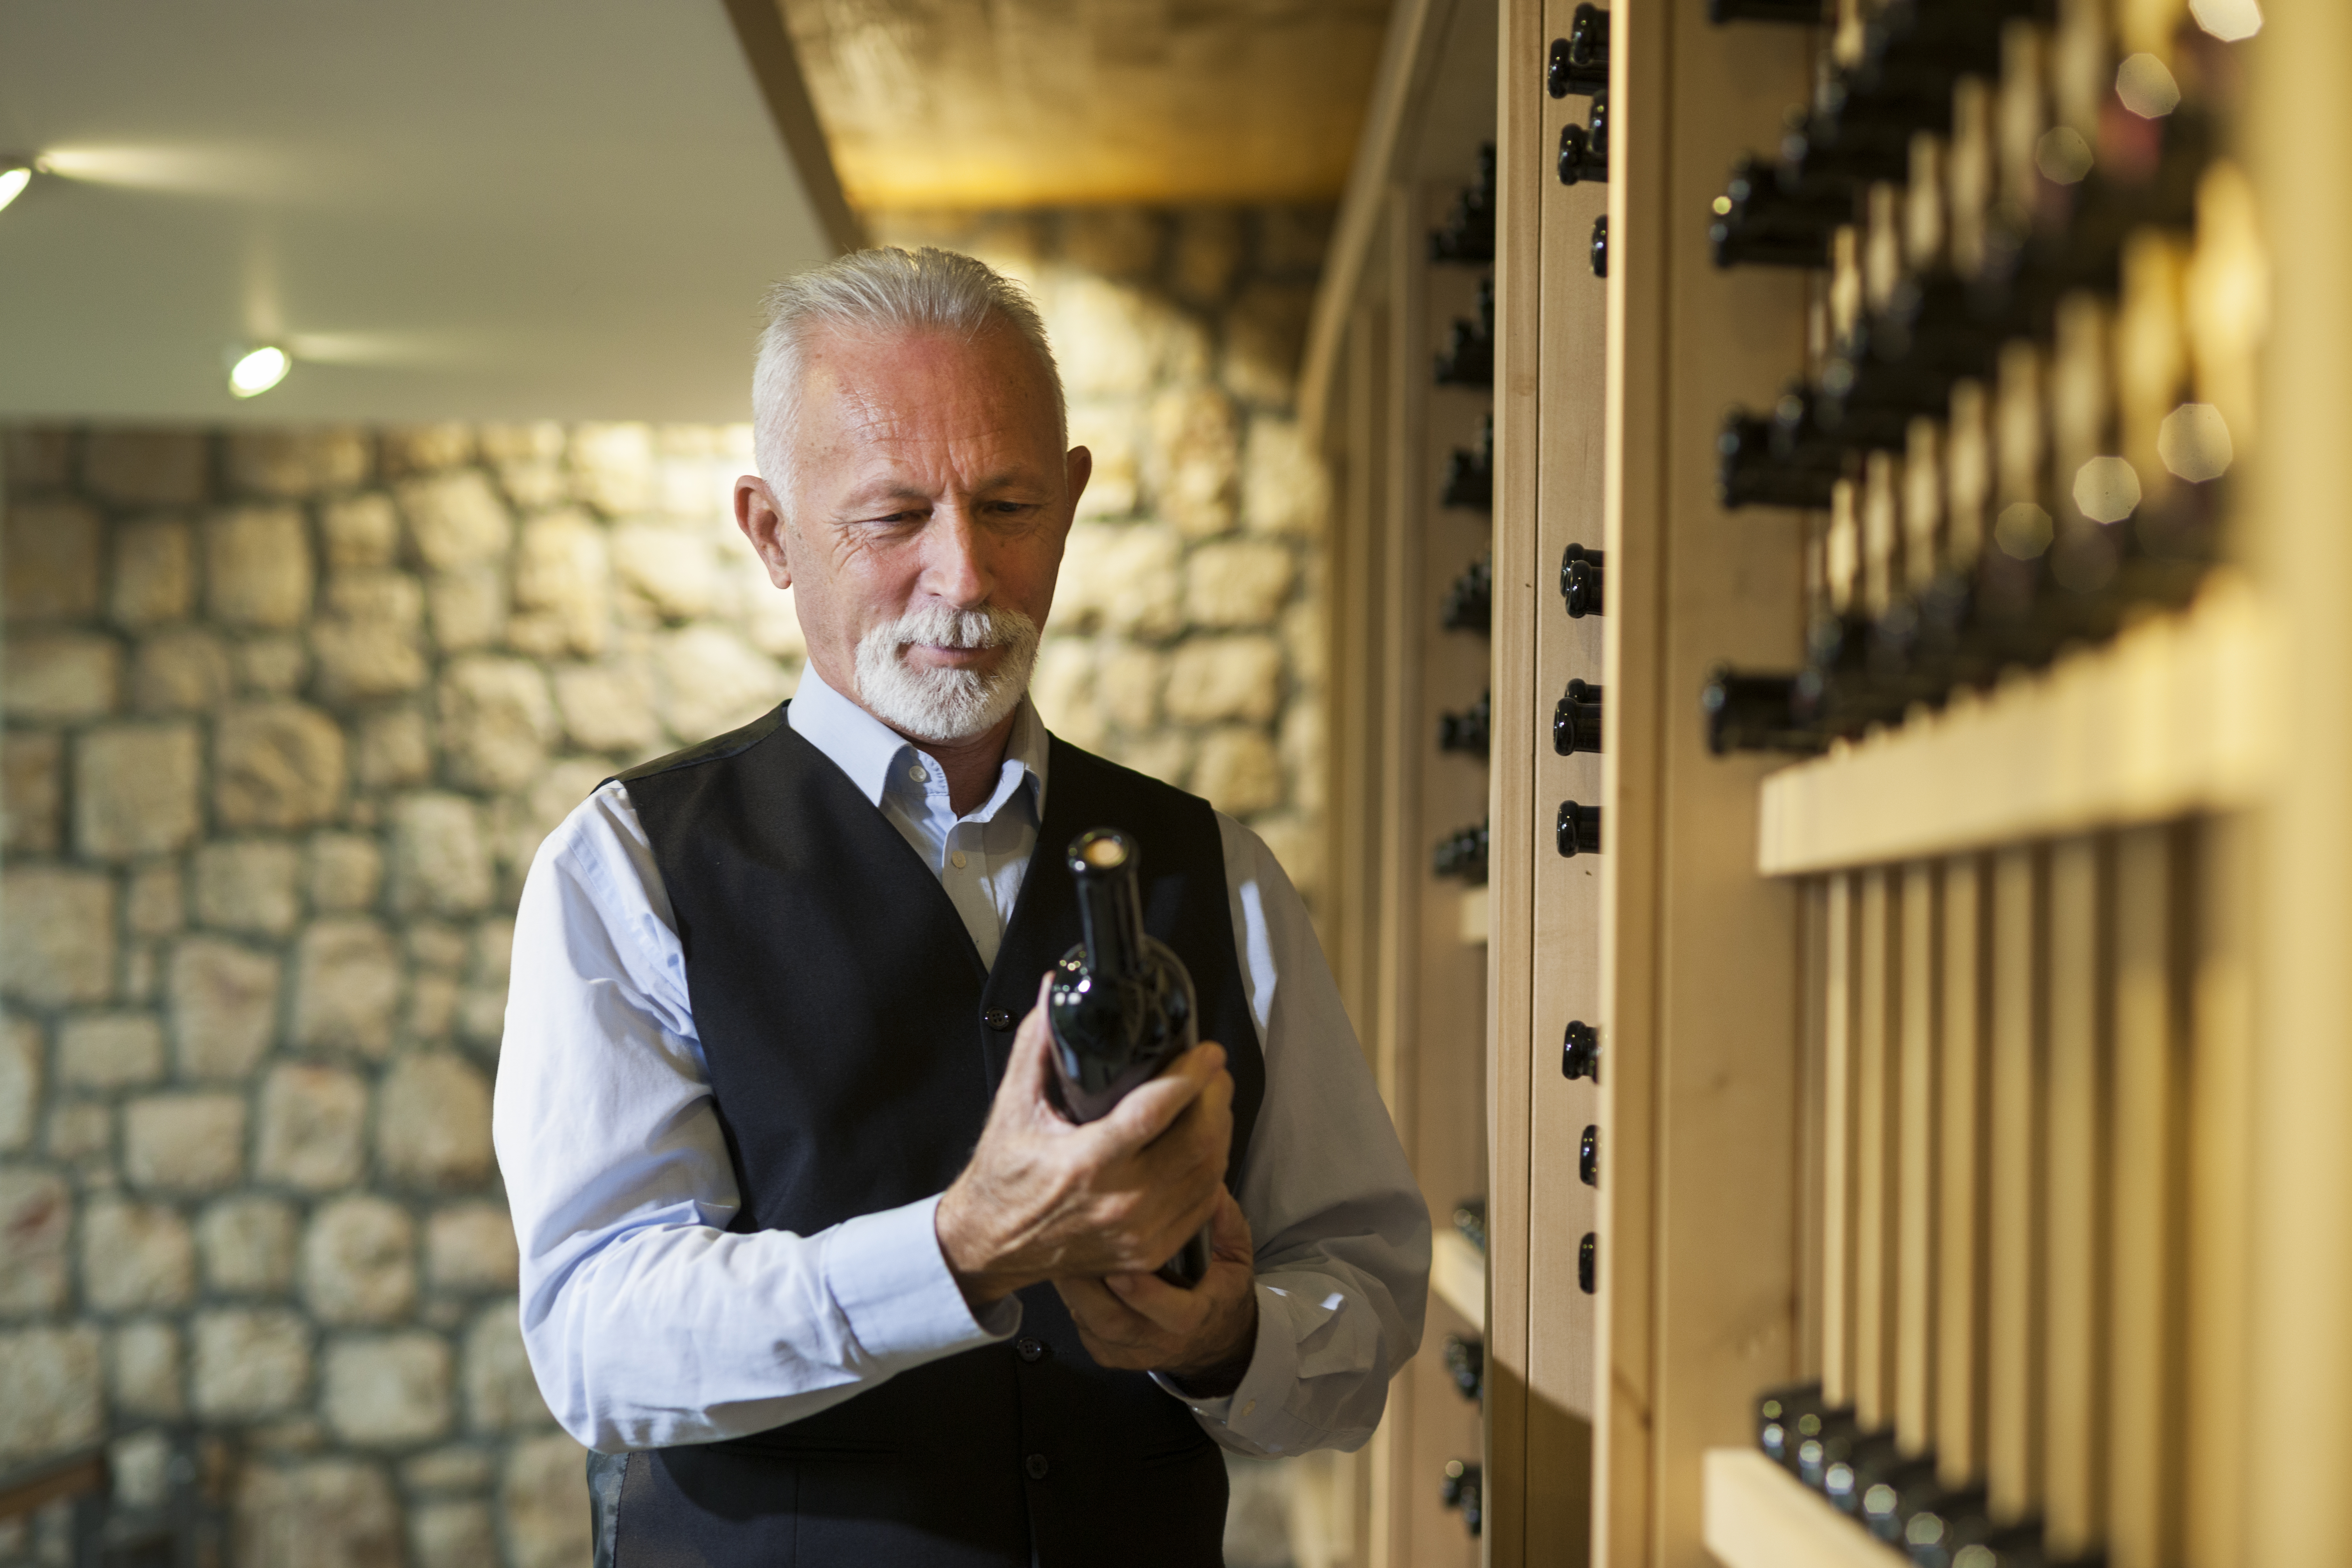 Senior winemaker with his collection of wine